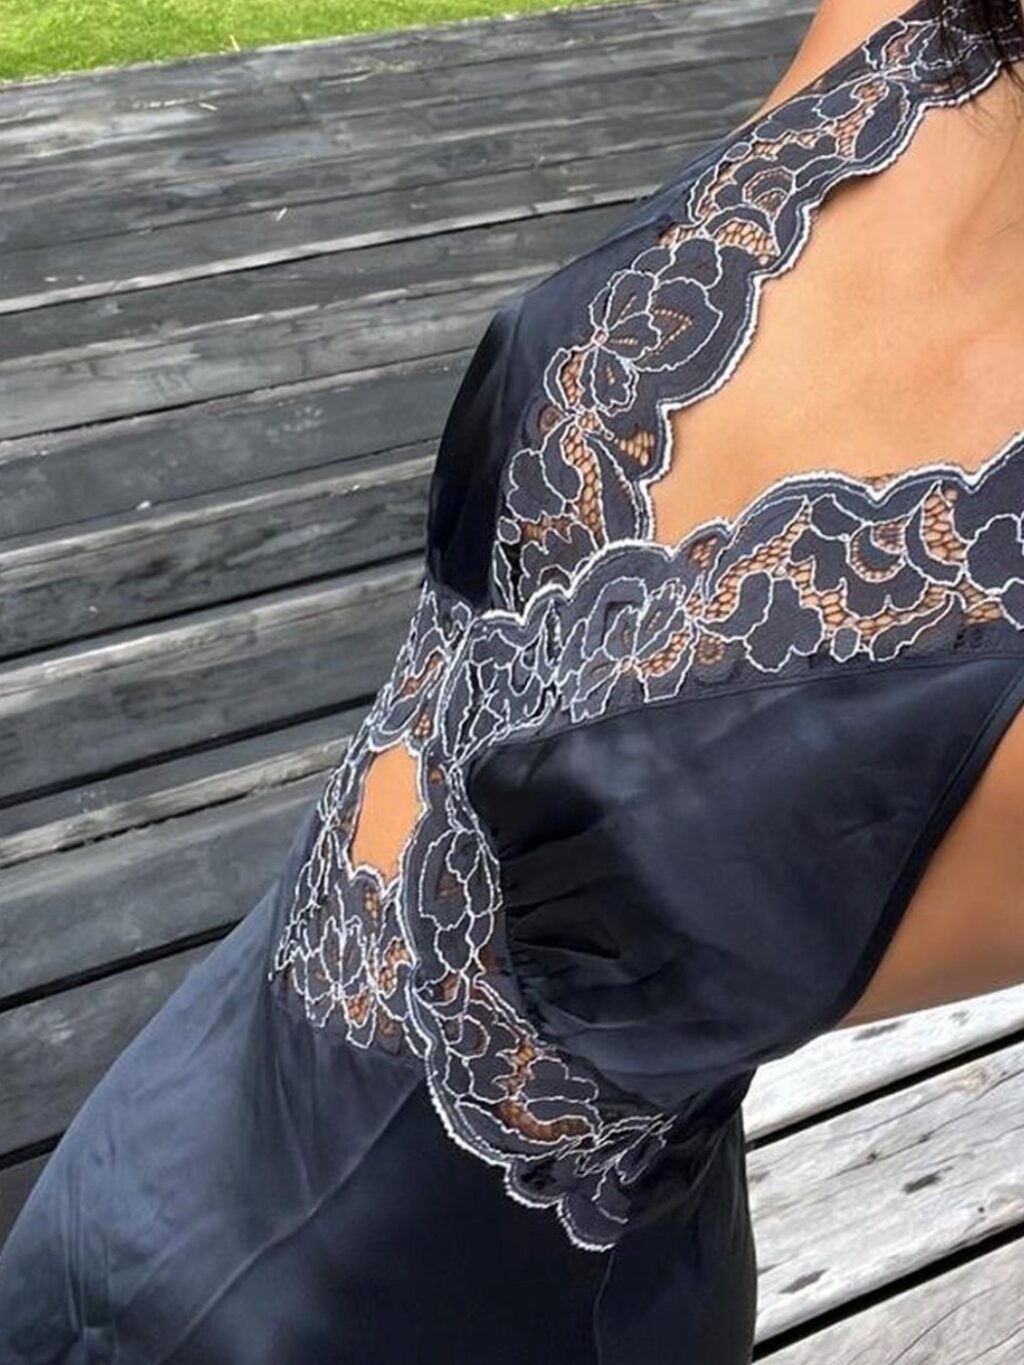 Sir The Label Aries Maxi Dress for hire in navy blue.